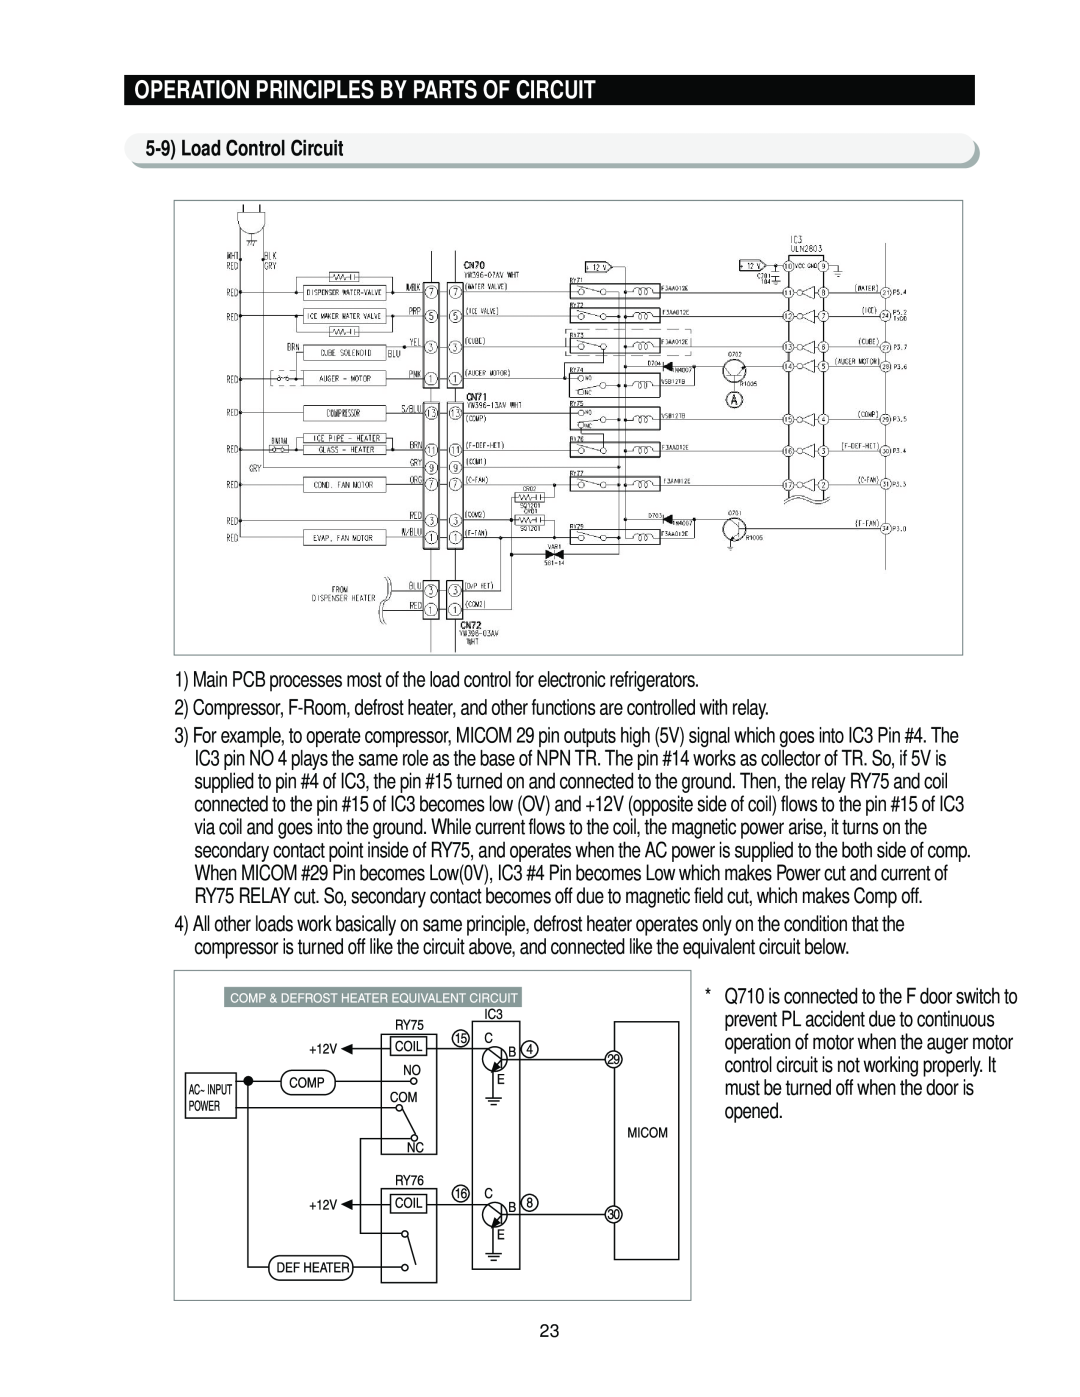 Samsung RS2*3* manual 5-9Load Control Circuit, Operation Principles By Parts Of Circuit 